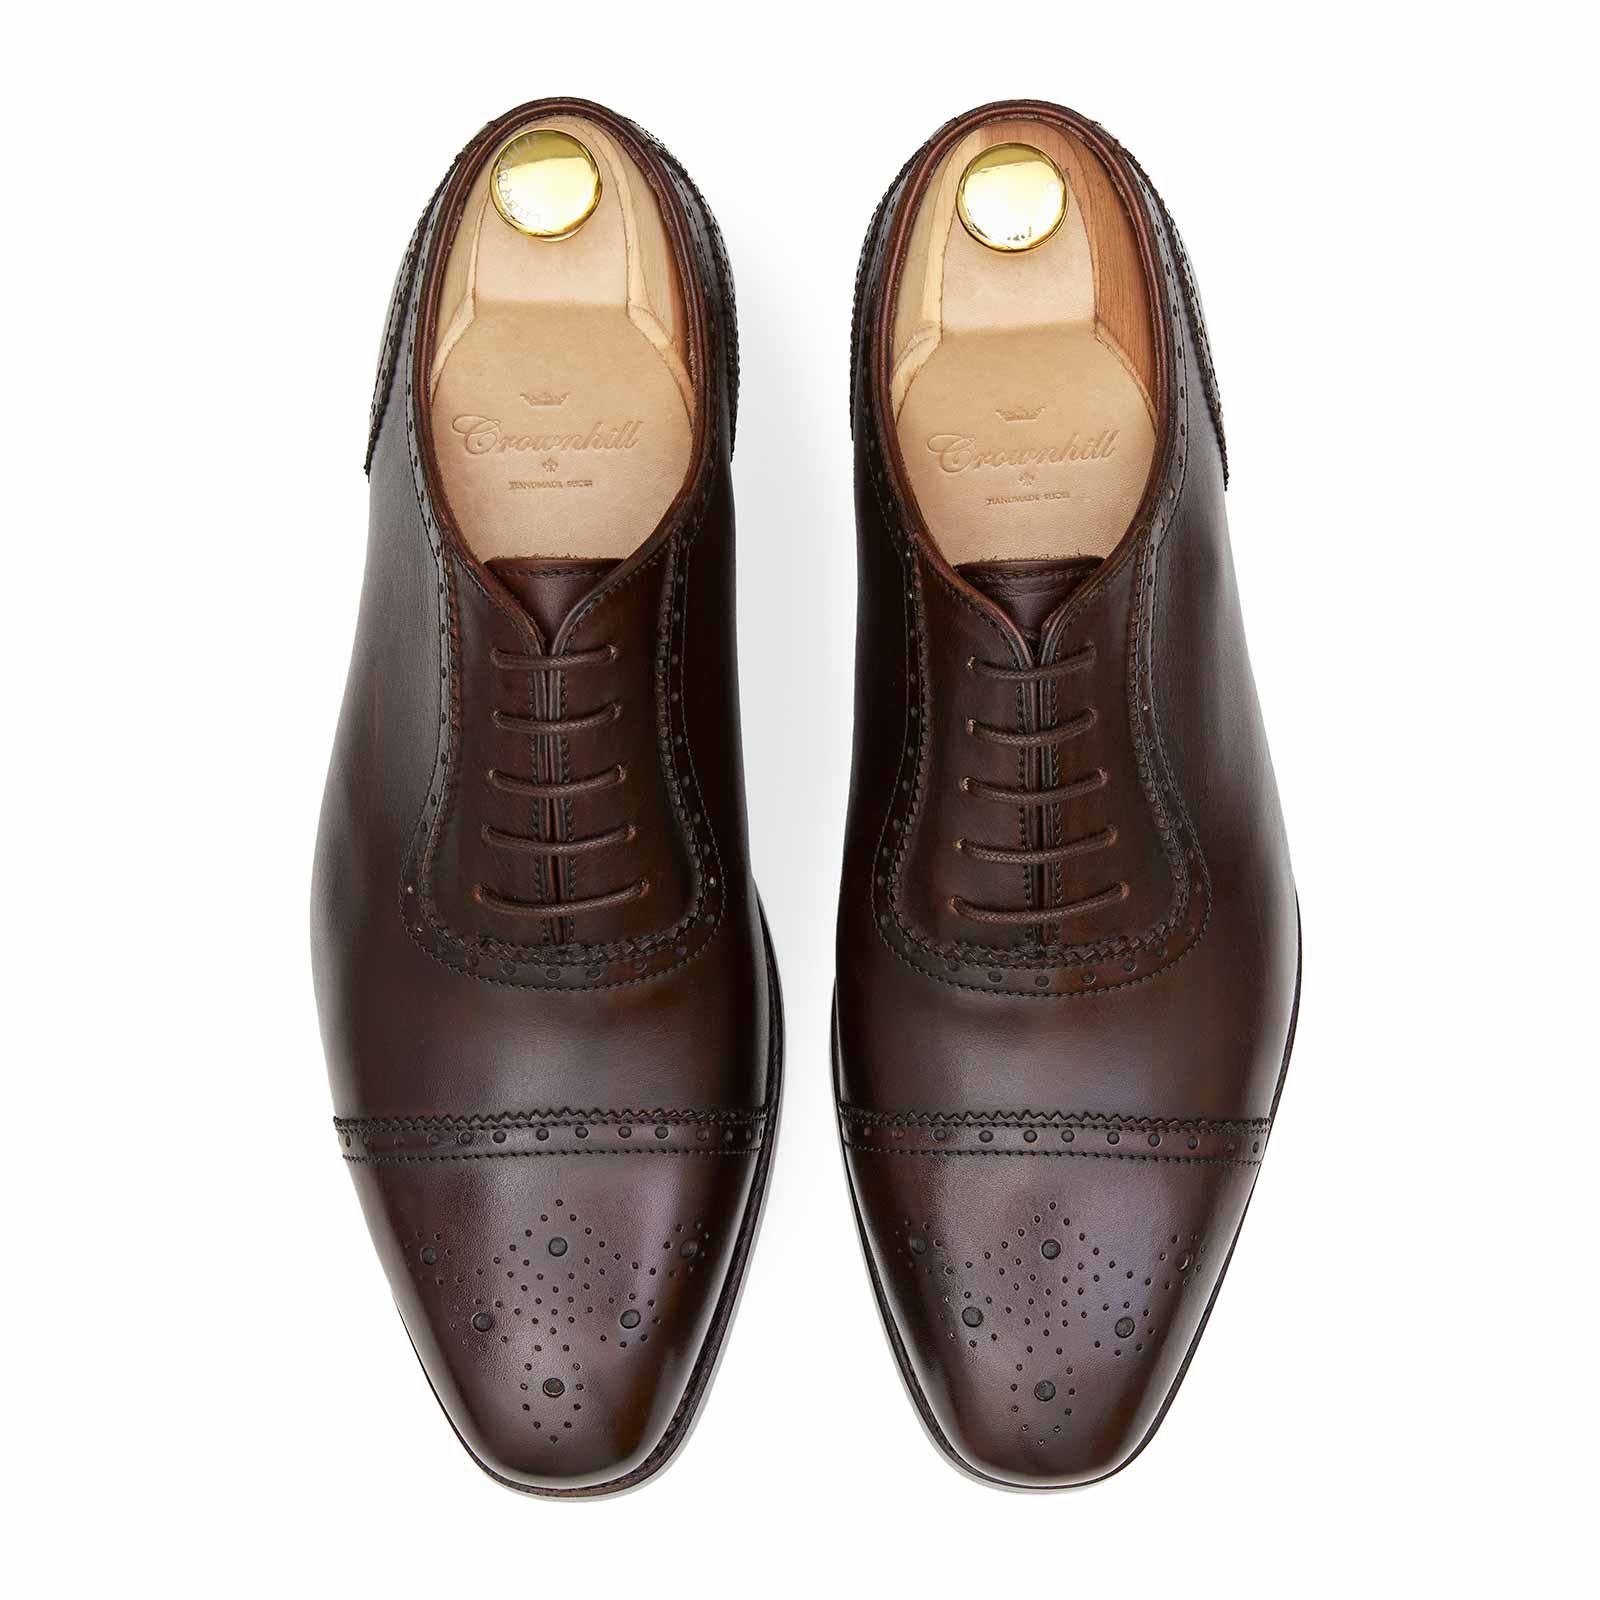 The Arnold: Zapato Oxford Legate Marrón | Crownhill Shoes